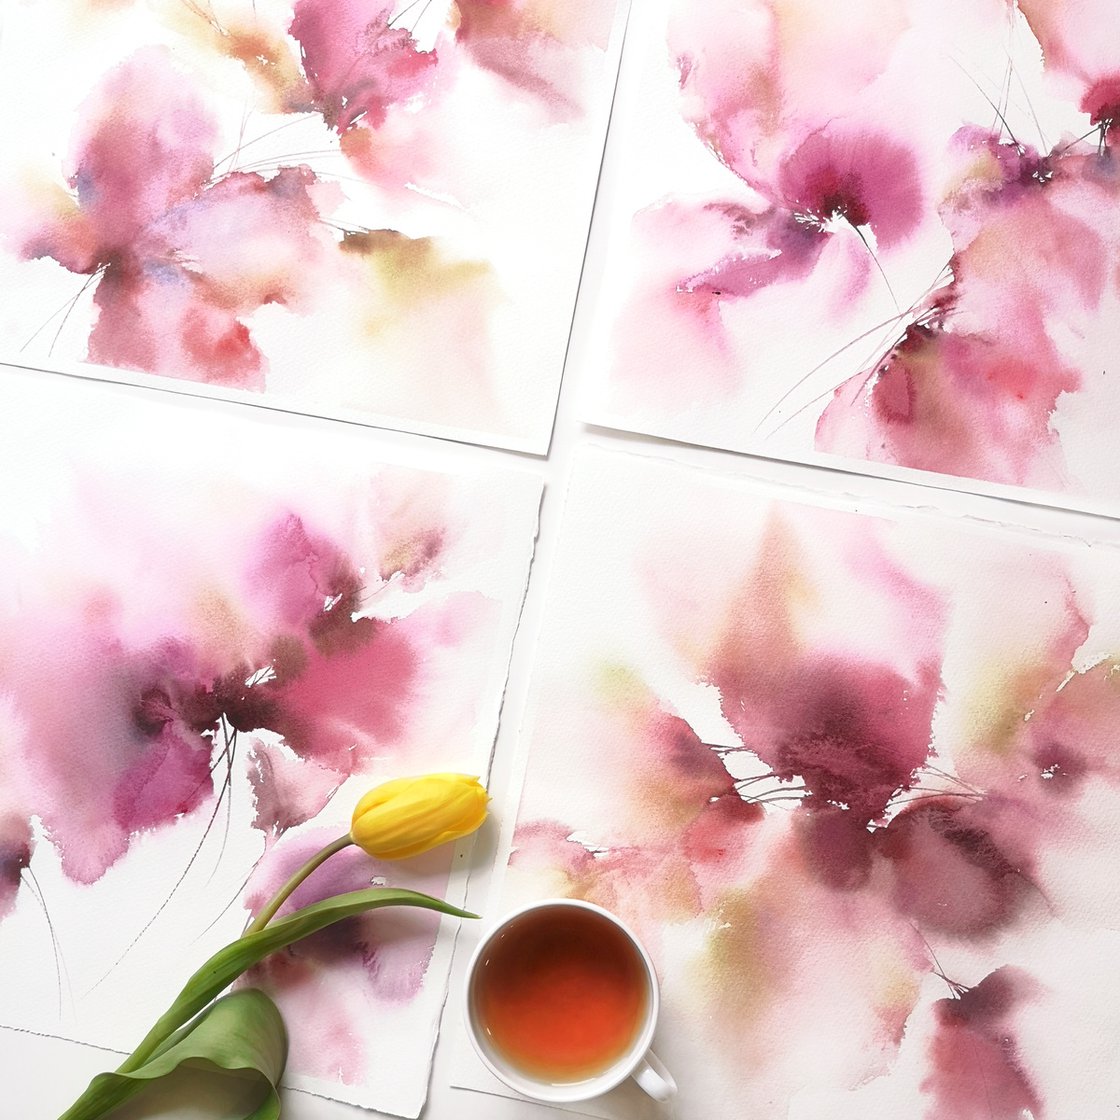 Abstract watercolor floral art, loose flowers Spring Watercolour by